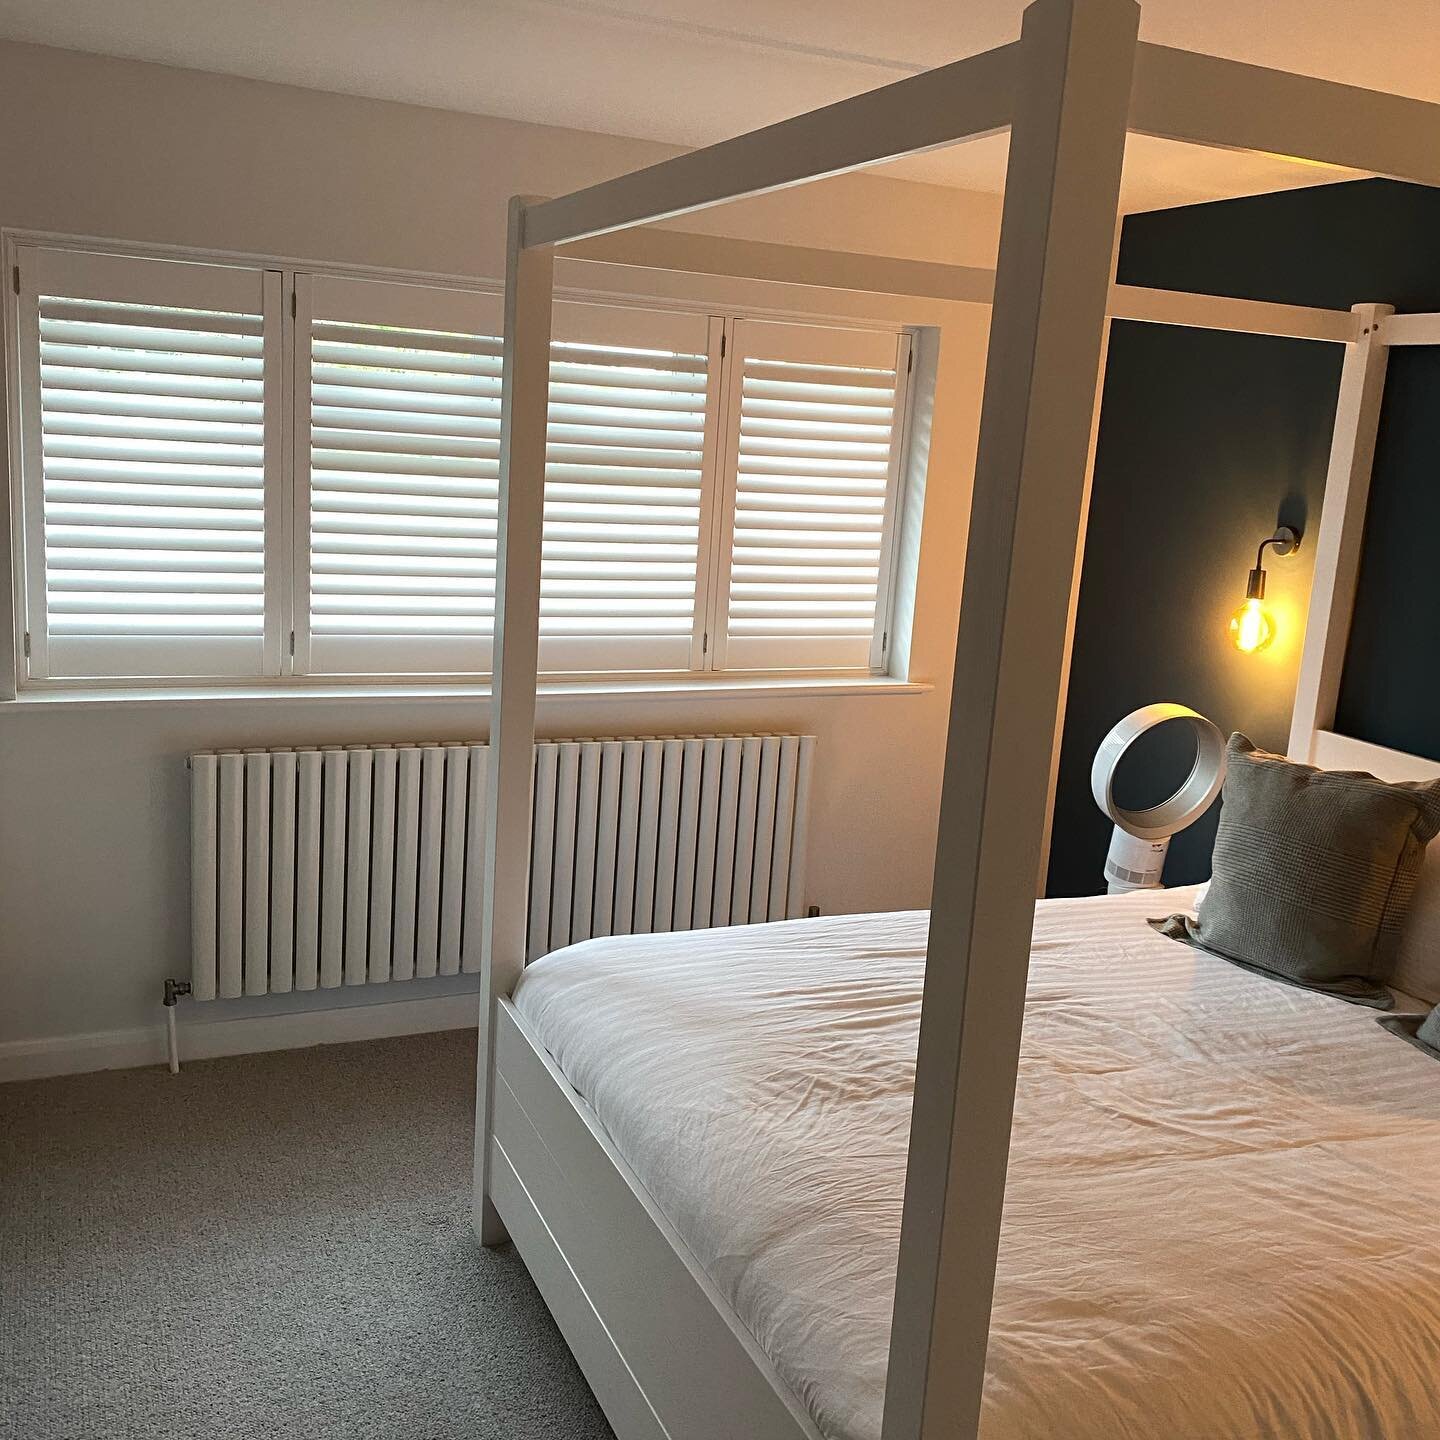 Shutters make a great impression in all rooms. Only 4 weeks to get your orders in for guaranteed Christmas installation. #homedecor #homeimprovement #christmas #plantationshutters